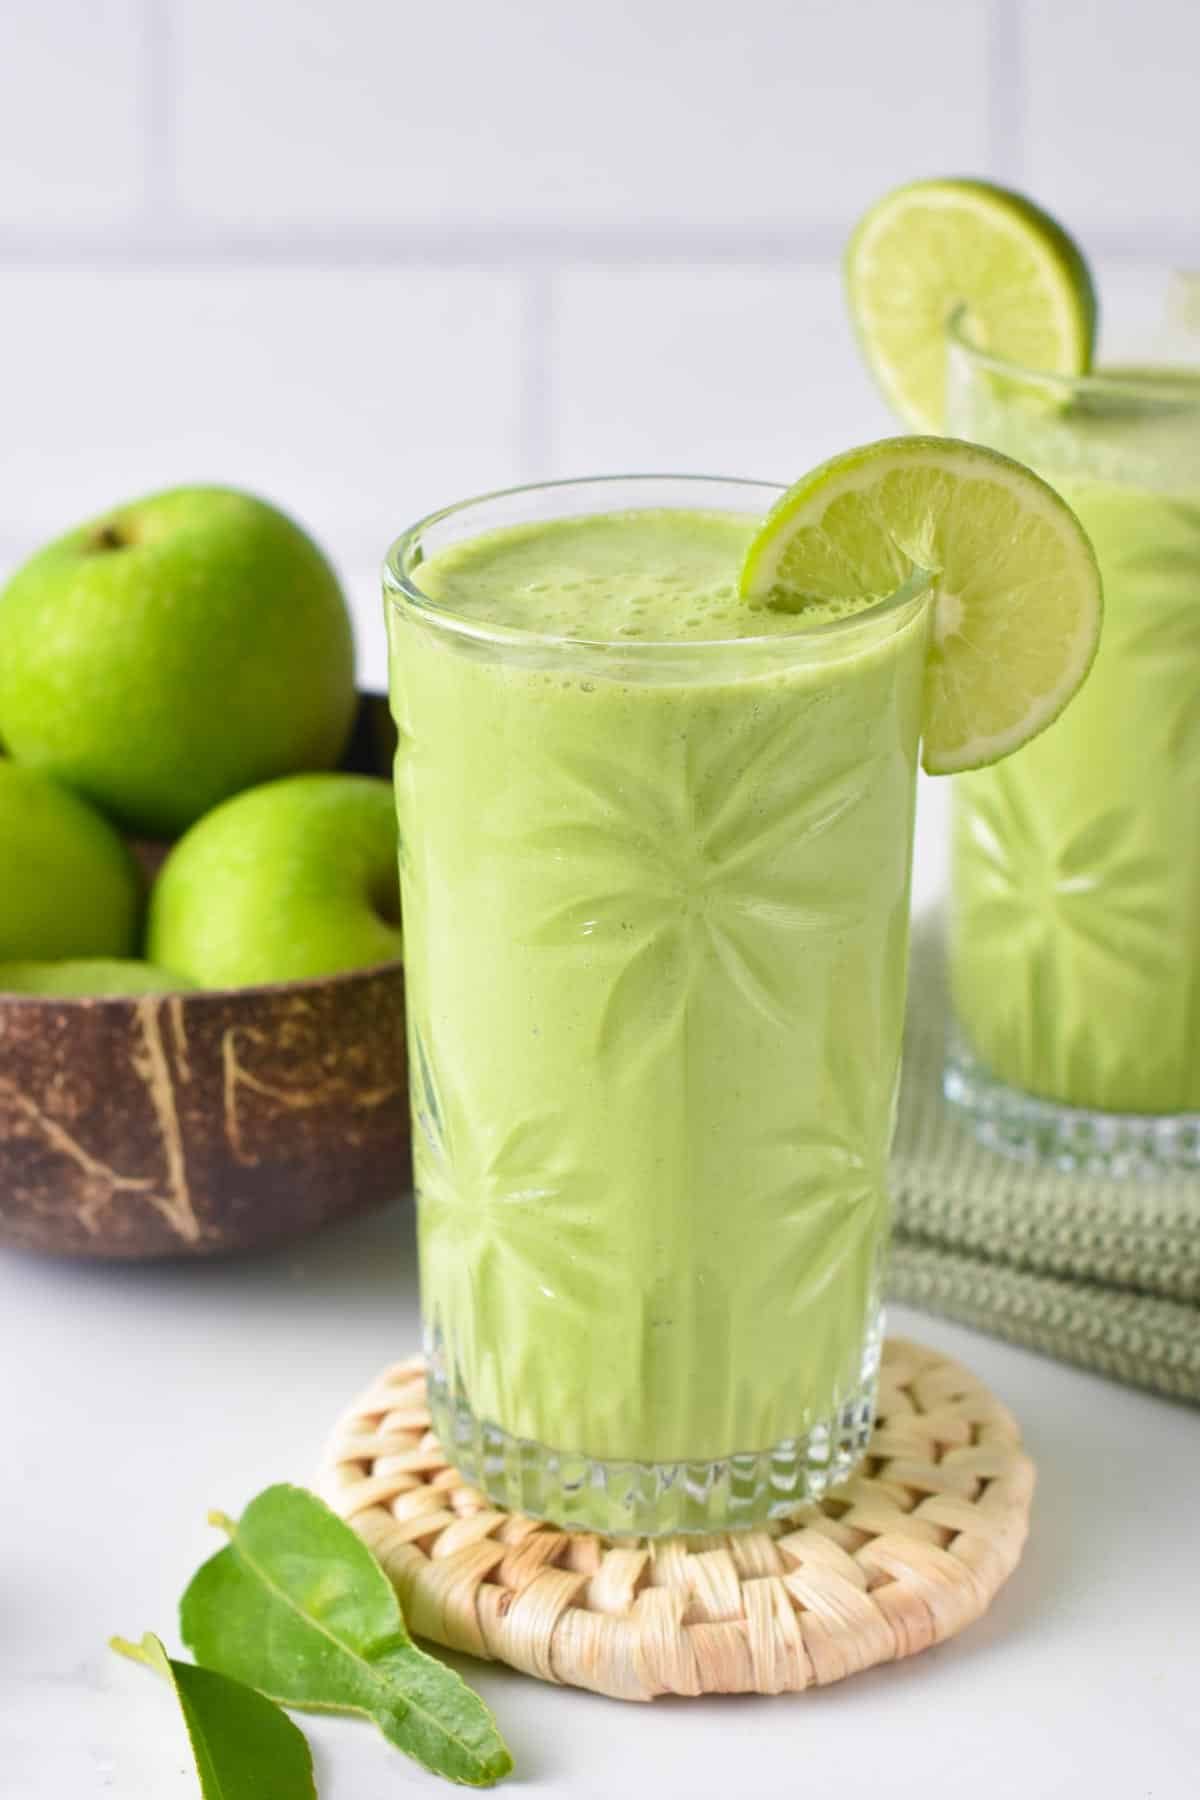 This Sour Apple Smoothie recipe is the perfect green smoothie for green apple lovers with a sweet and tart flavor. Plus, this green apple smoothie is also dairy-free and gluten-free.